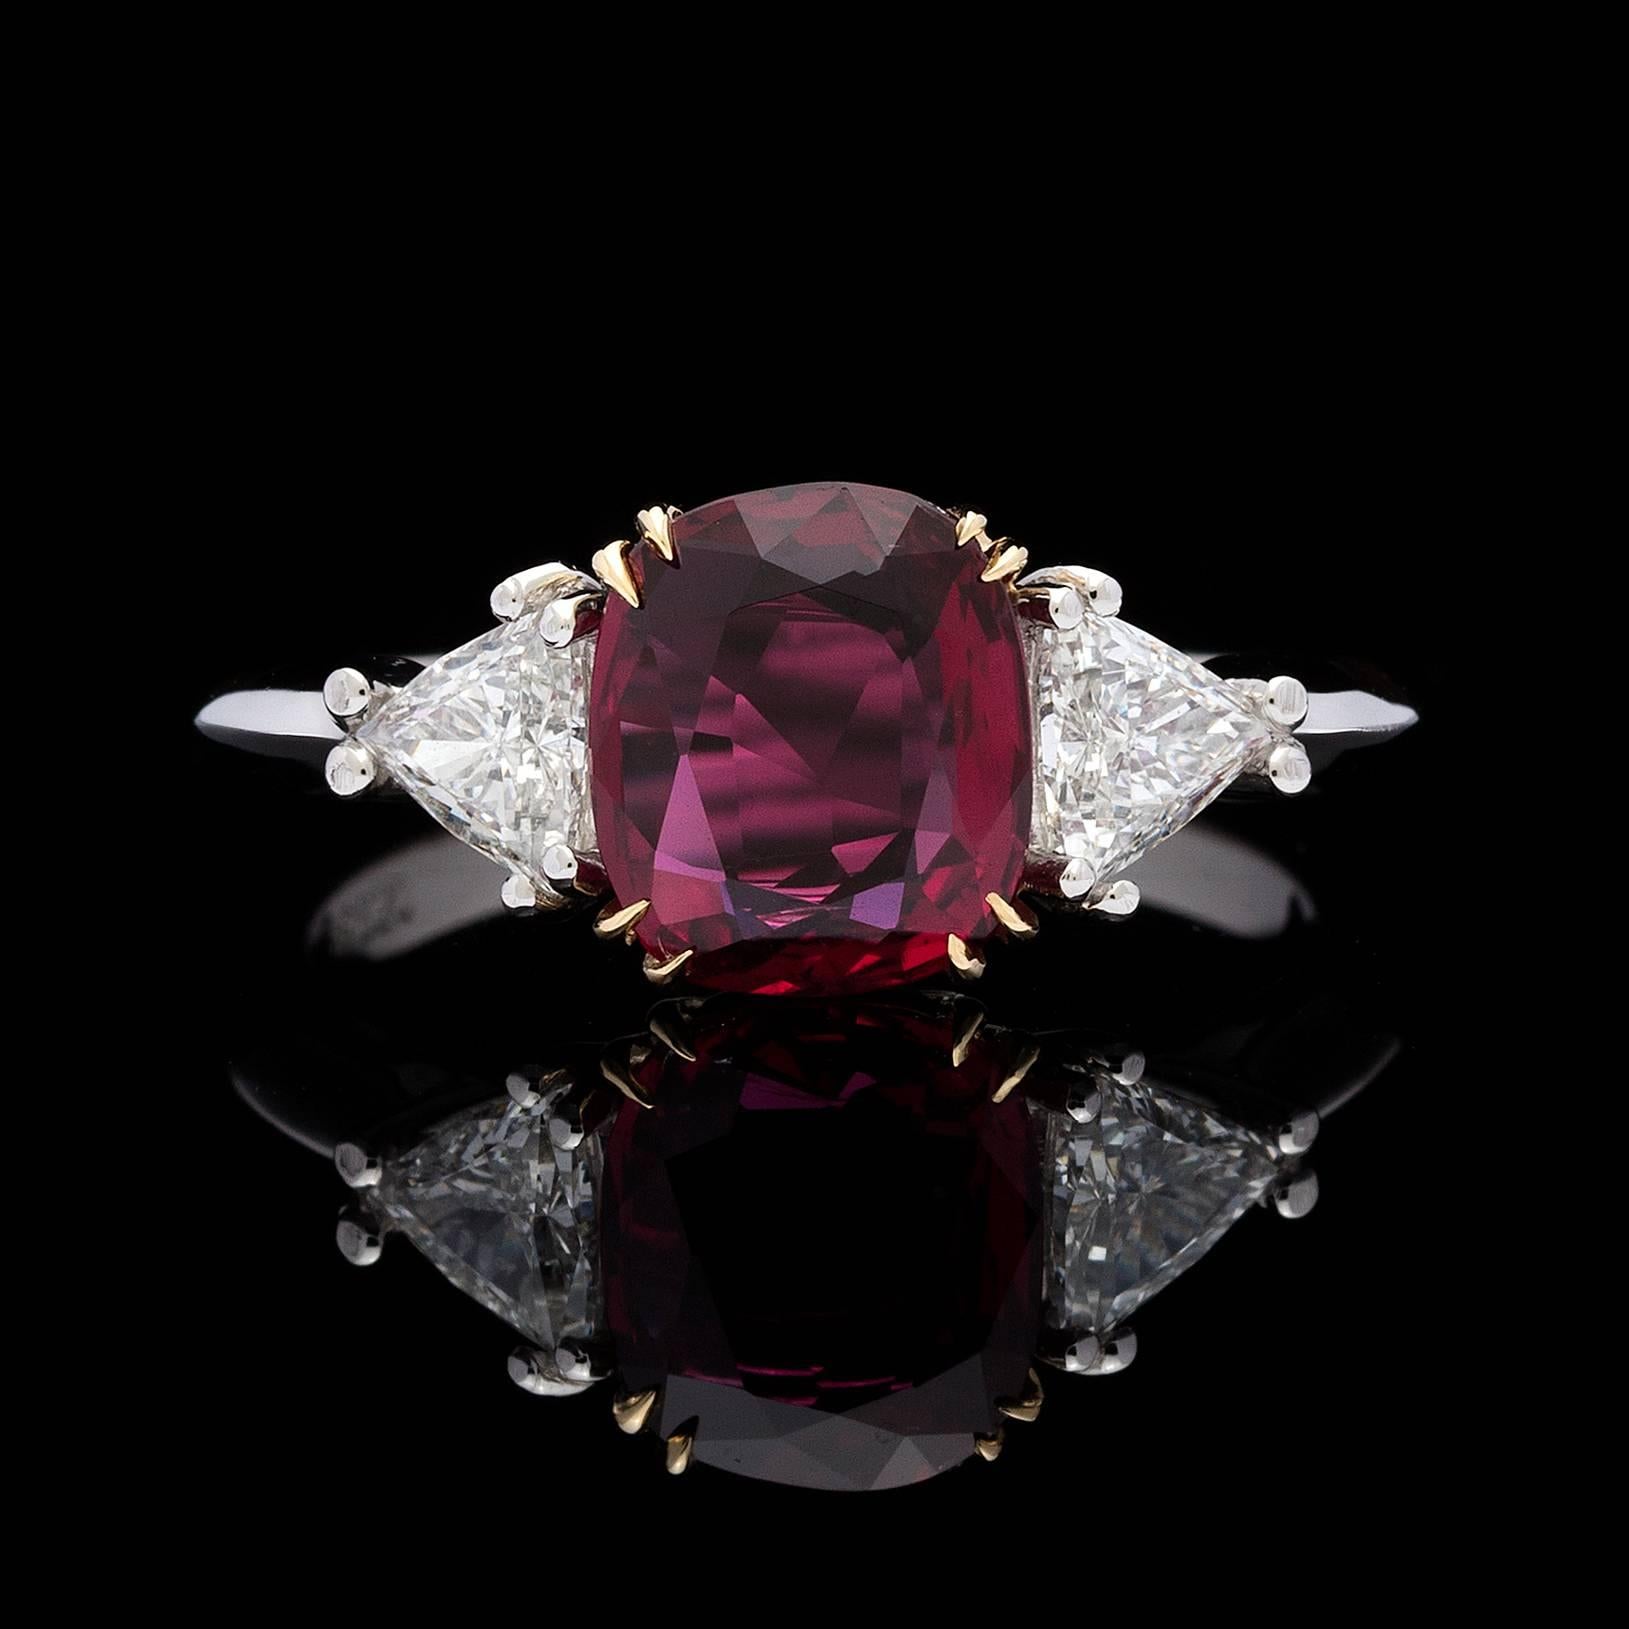 18k white gold ring features an AGL 2.04 carats cushion cut purplish-red ruby. Flanked on each side are brilliant trillion diamonds totaling 0.46 carats. The center ruby is set in yellow gold split-prongs and diamonds set in white gold split prongs.